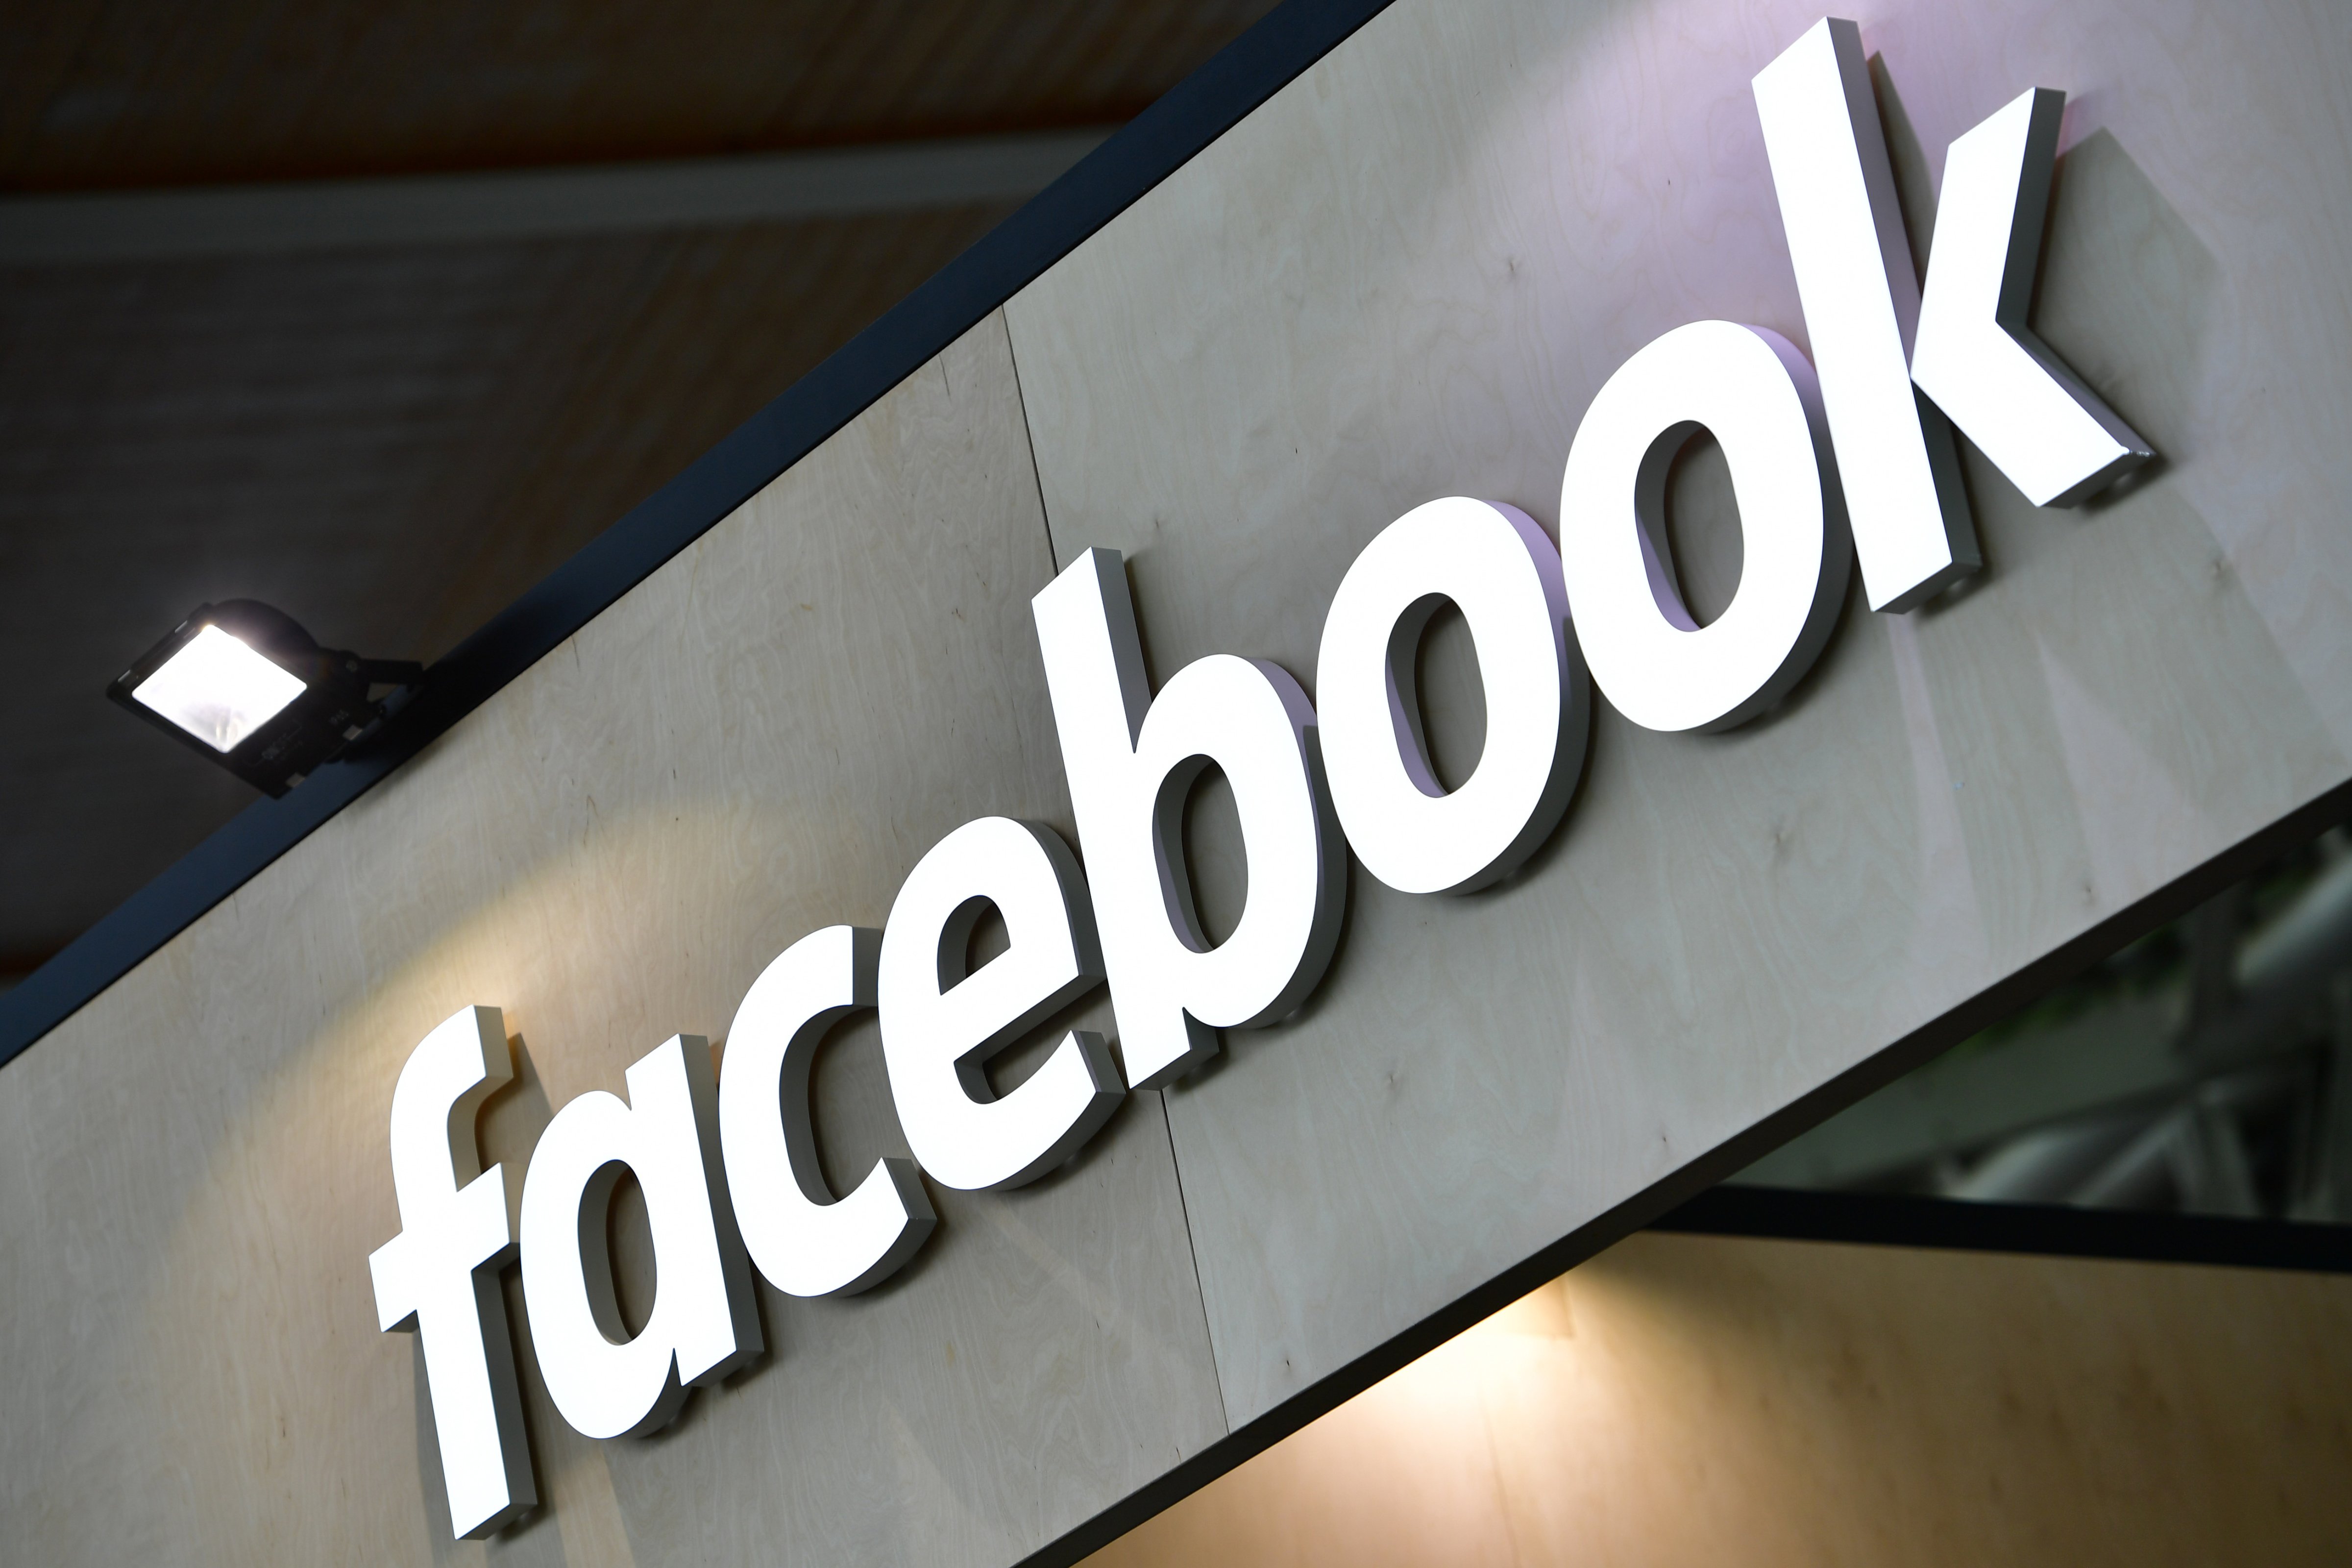 The Facebook logo is displayed at the 2018 CeBIT technology trade fair. (Alexander Koerner&mdash;Getty Images)